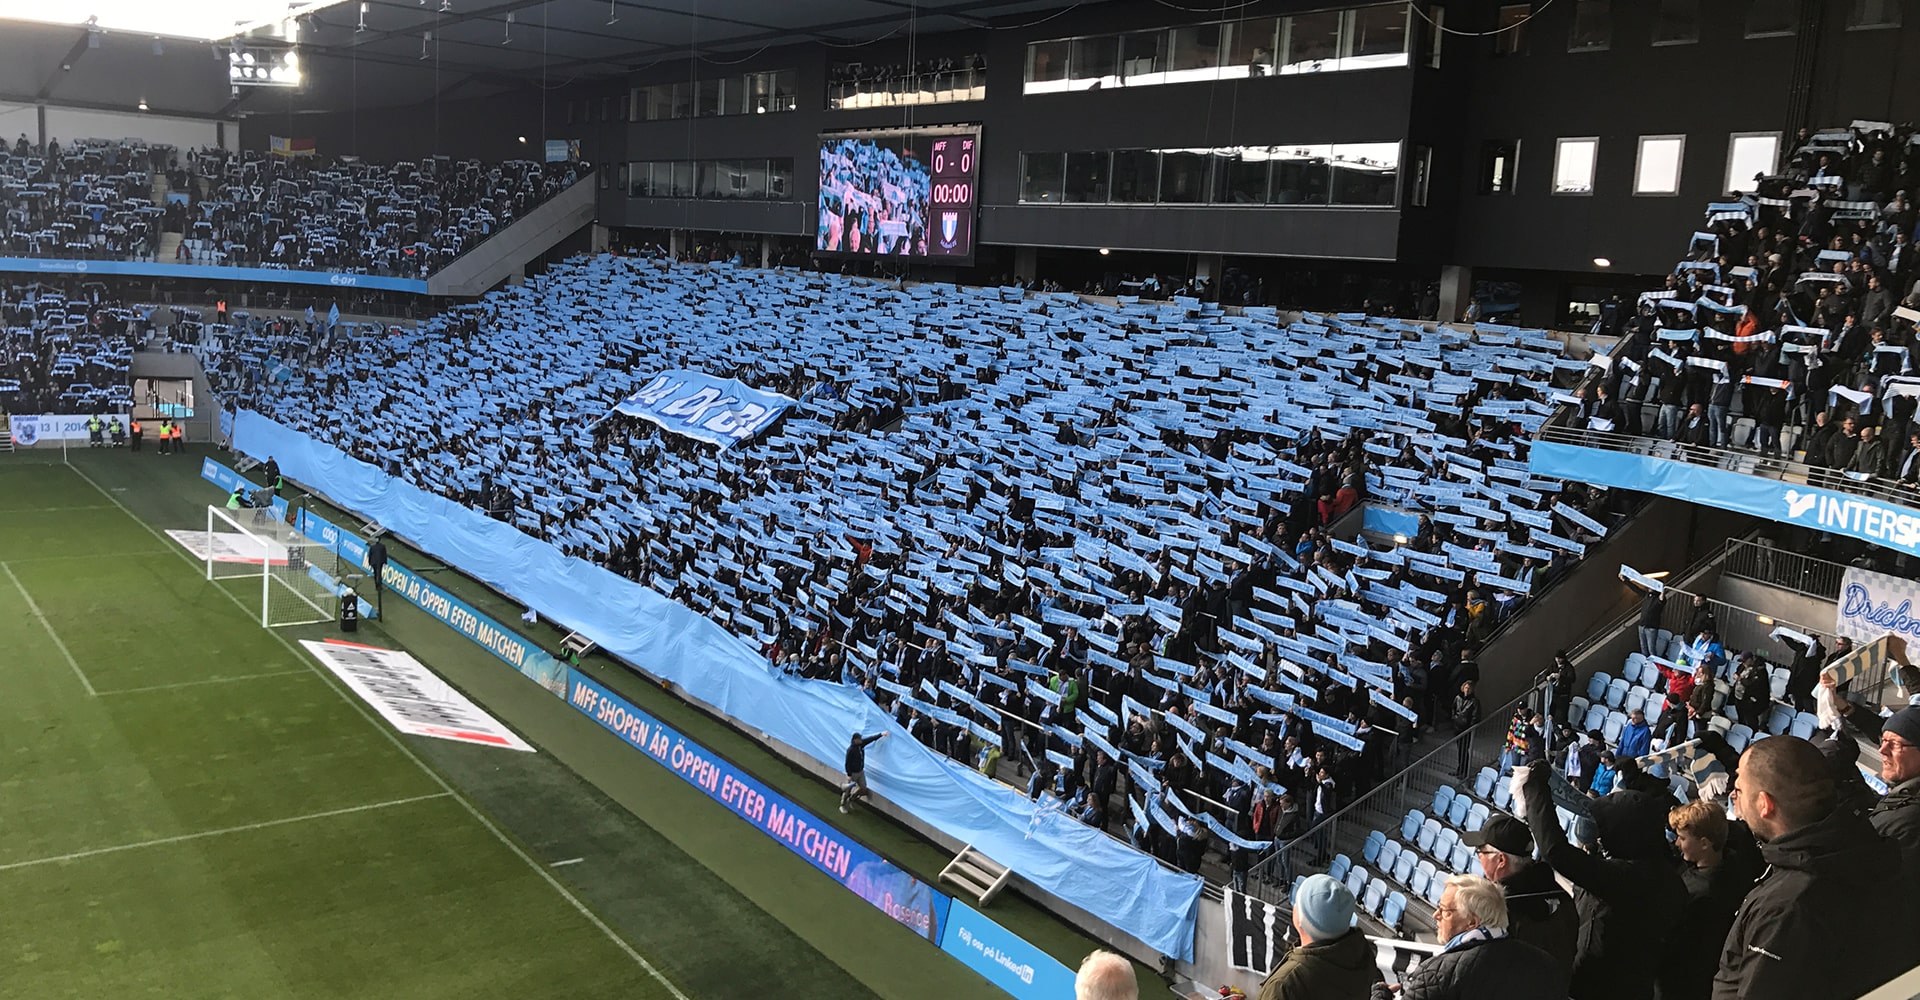 Malmö FF football supporters during a game